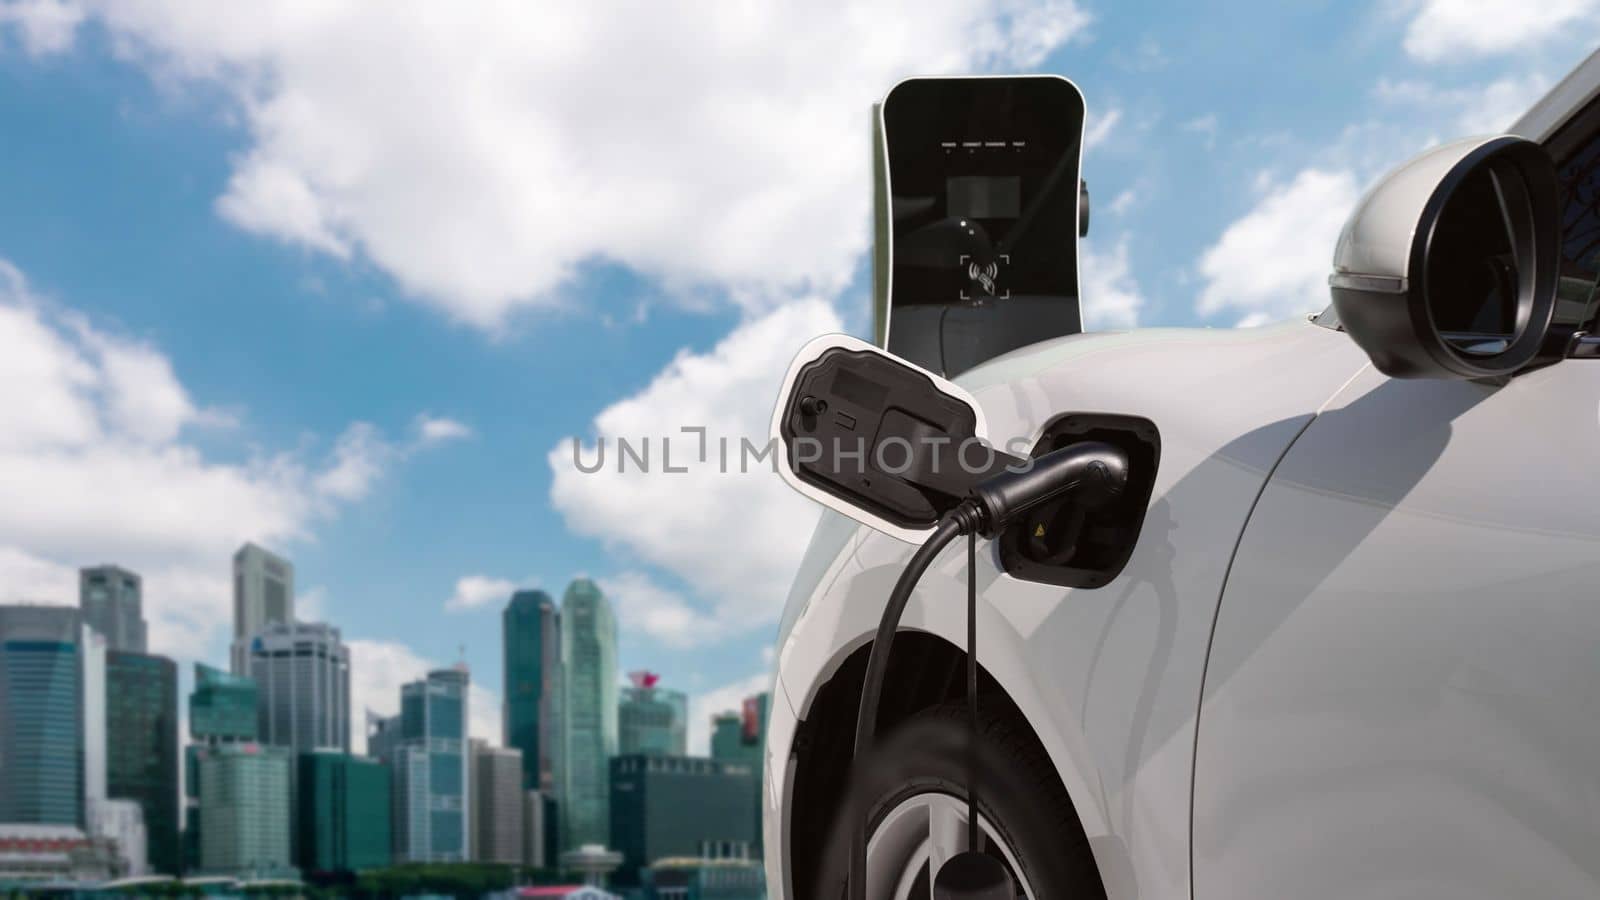 Eco friendly progressive clean energy concept with EV car with cityscape scenery by biancoblue